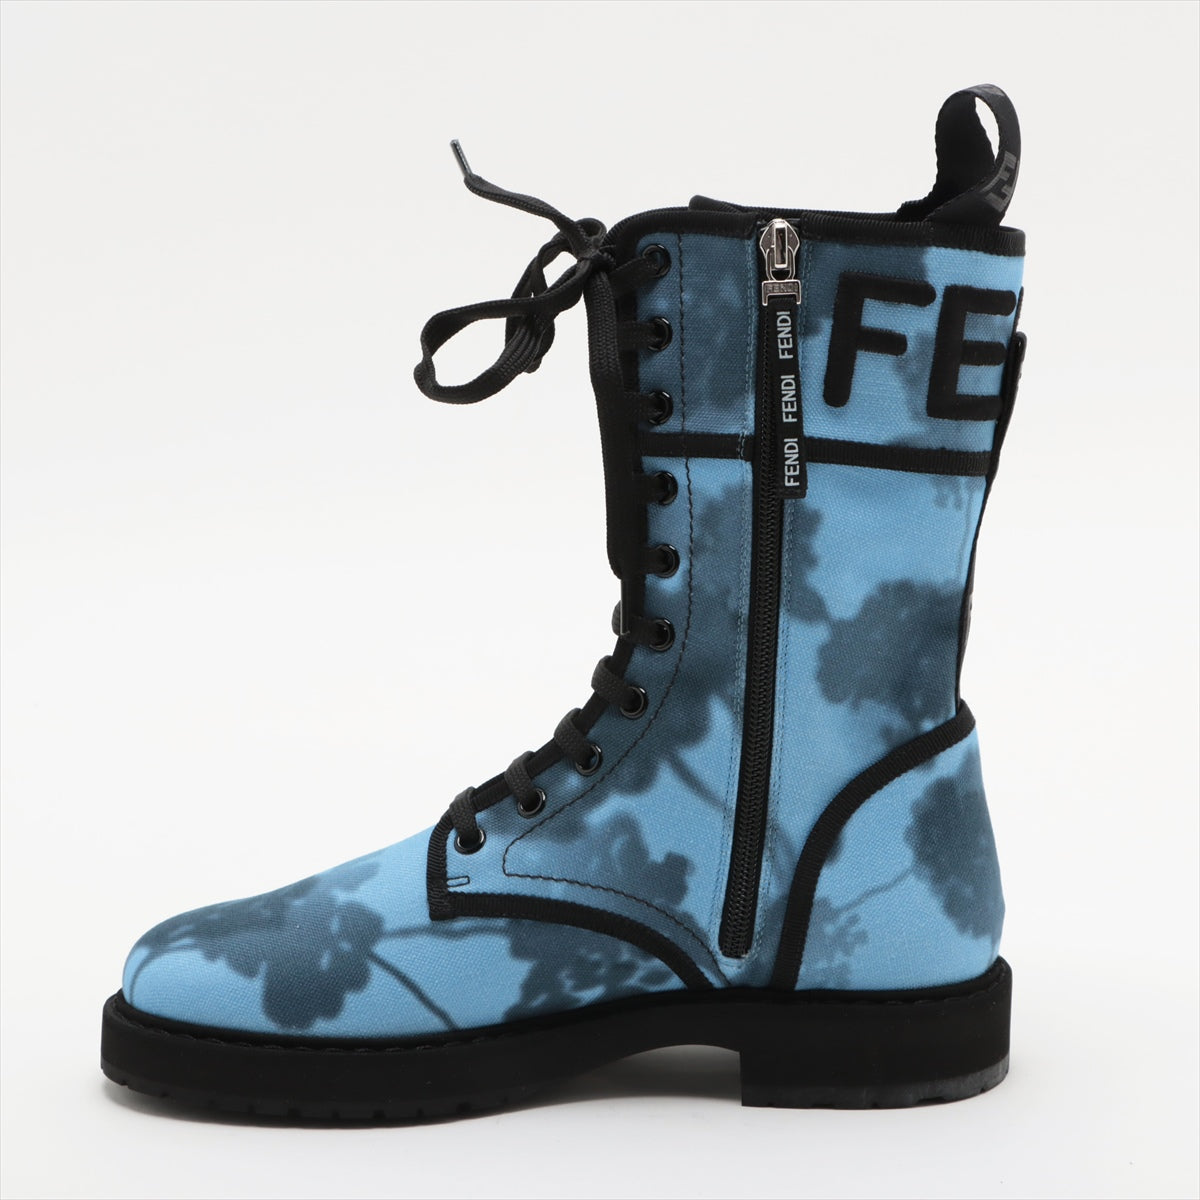 Fendi canvas Boots 37 1/2 Ladies' Blue There is a box